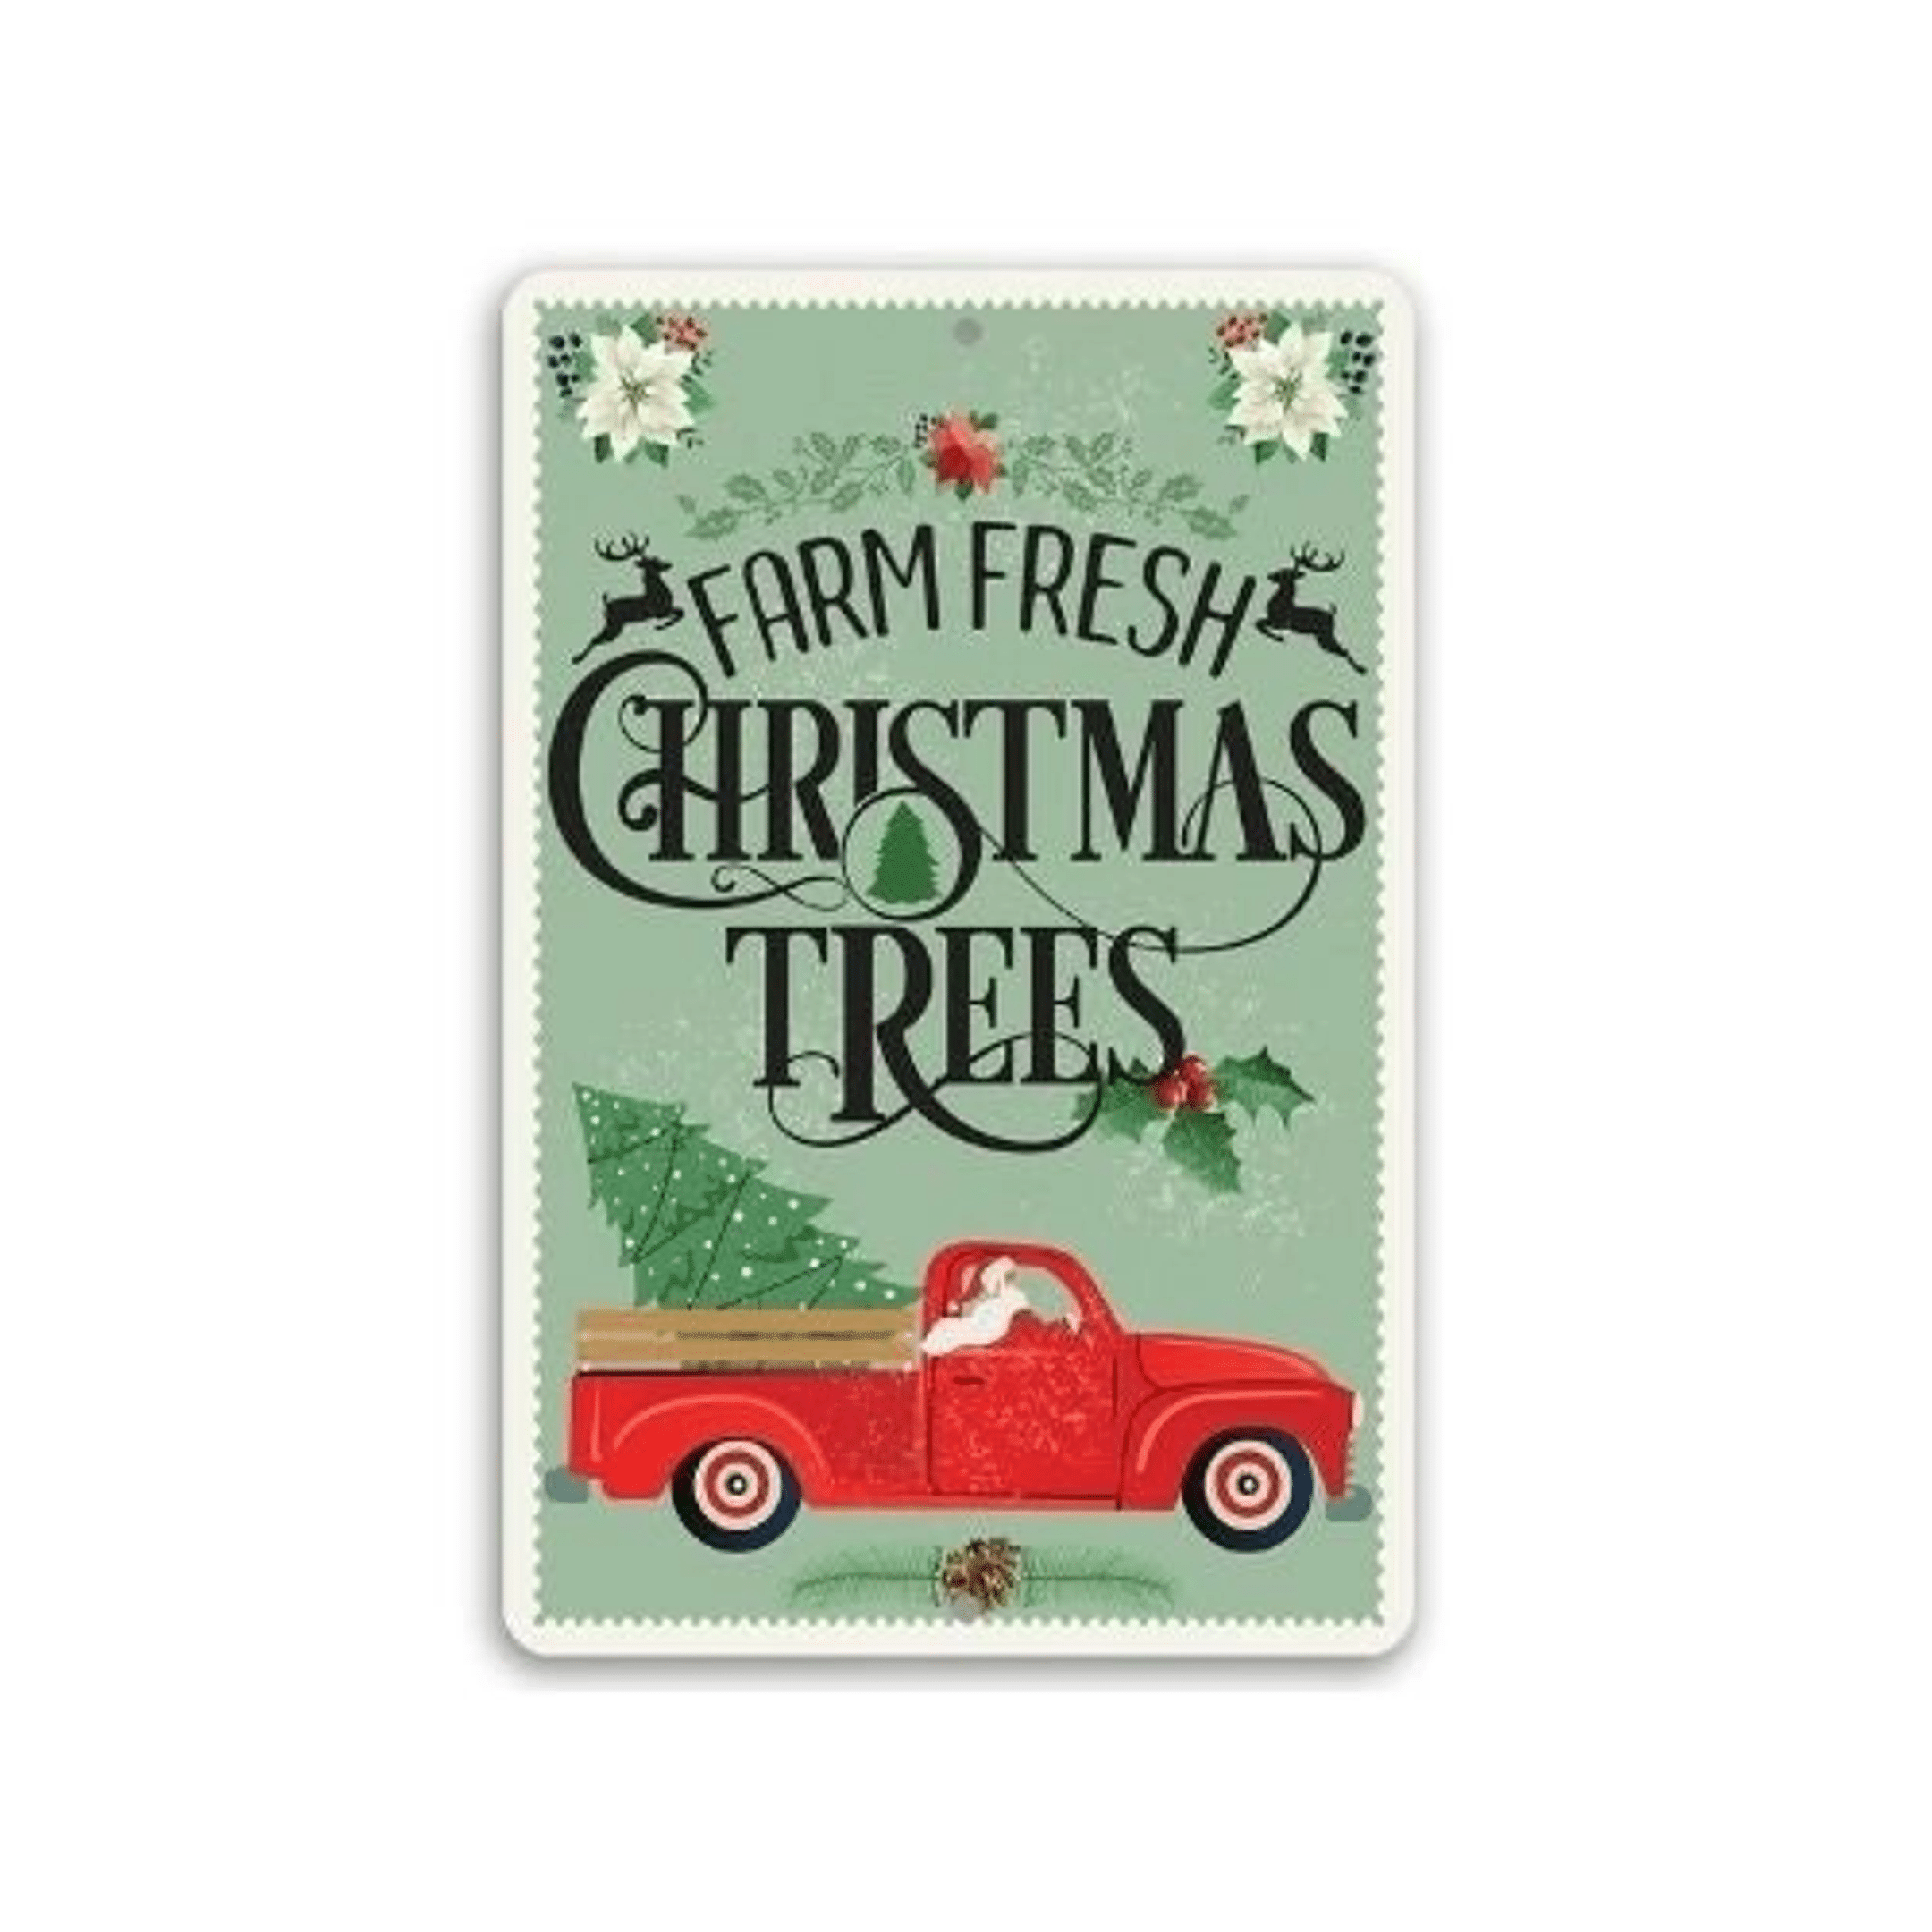 Tin Farm Fresh Christmas Trees Durable Metal Sign Use Indoor Outdoor Great Christmas Tree Shop Decor and Gift